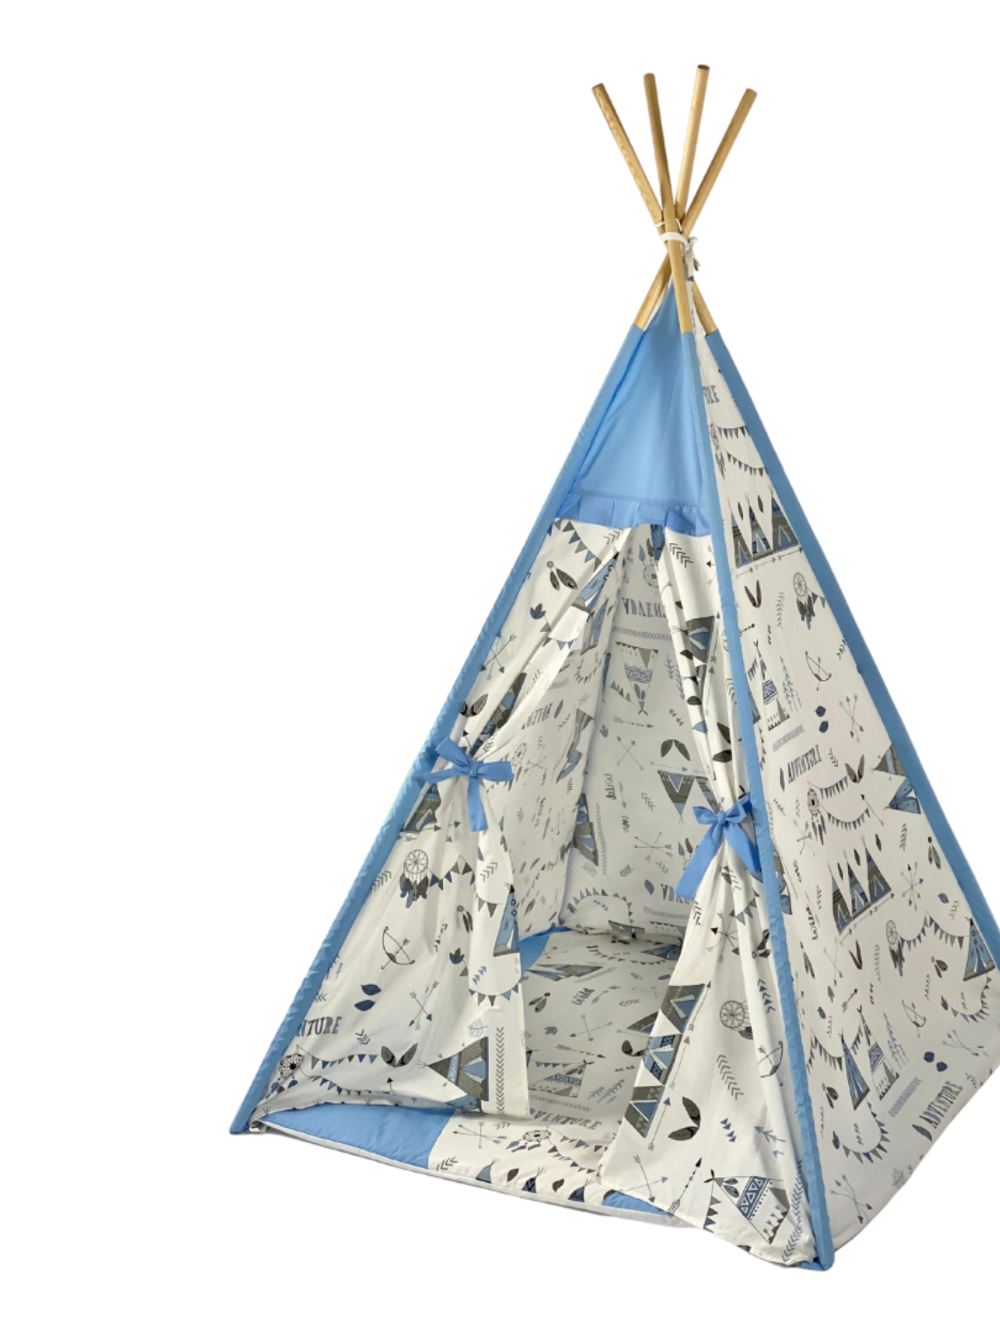 Children's Tent - teepee tent Indian Blue